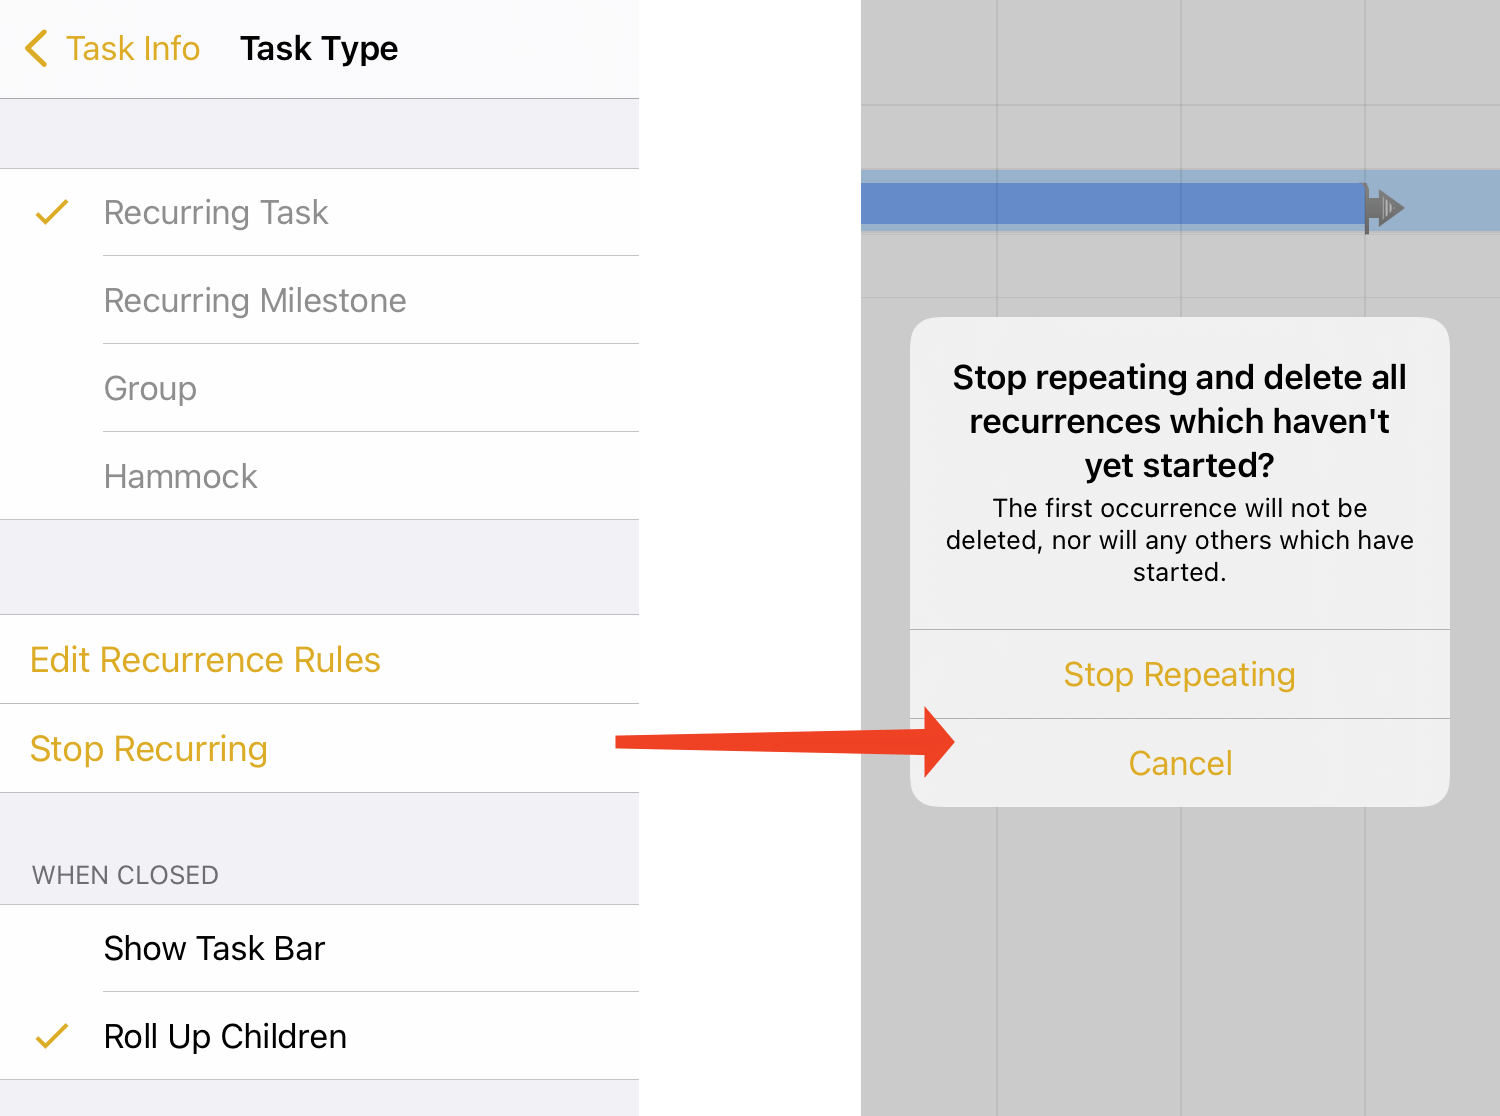 The Task Type screen for a recurring task, and the Stop Recurring dialog.